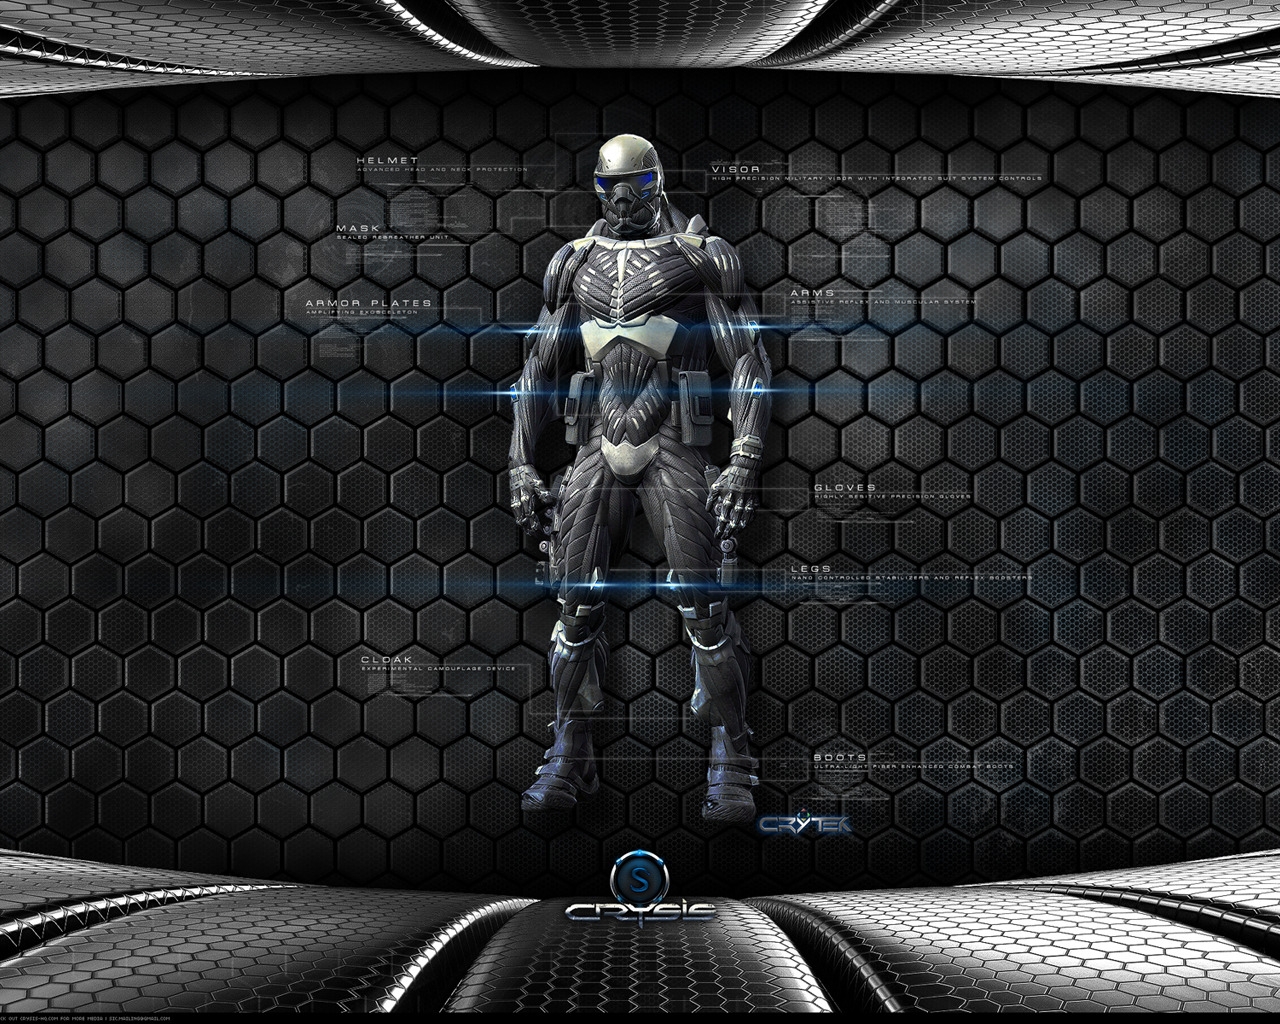 Crysis Character for 1280 x 1024 resolution